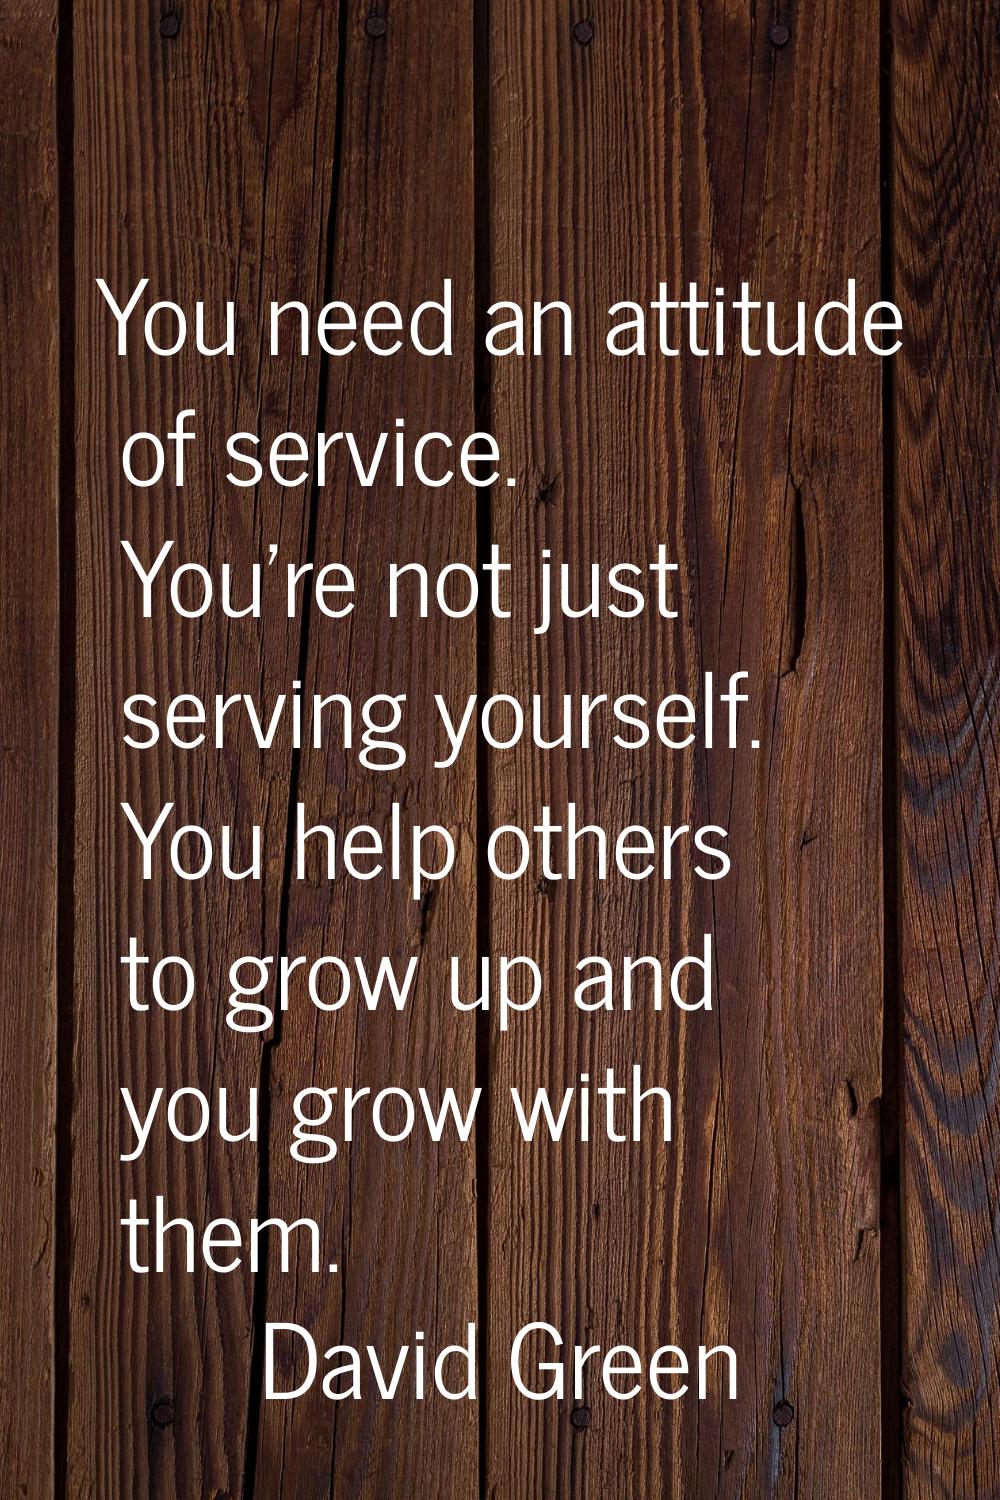 You need an attitude of service. You're not just serving yourself. You help others to grow up and y